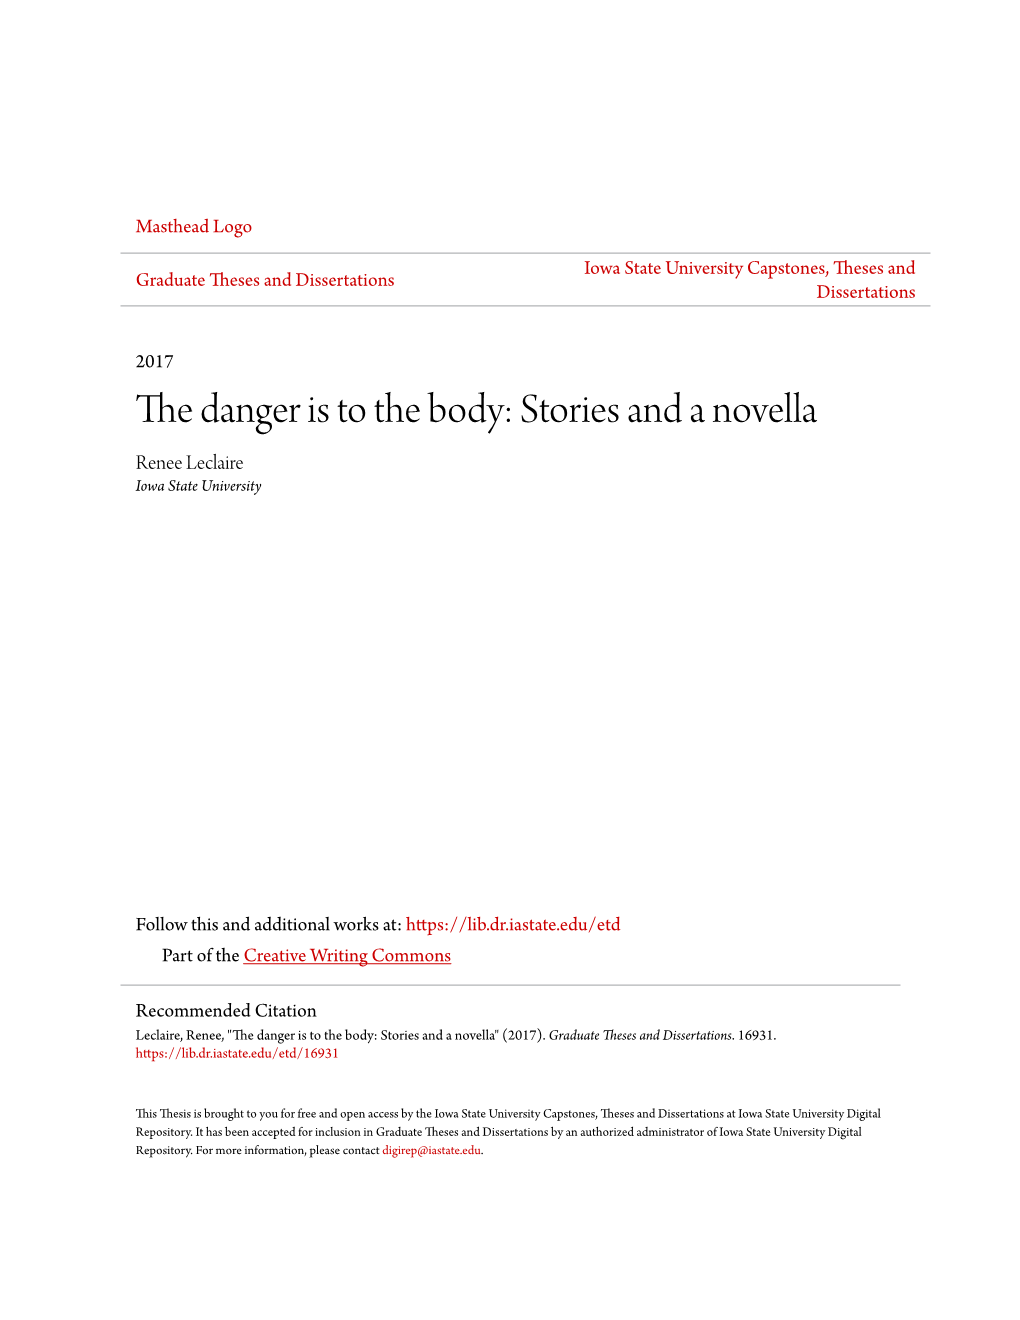 The Danger Is to the Body: Stories and a Novella